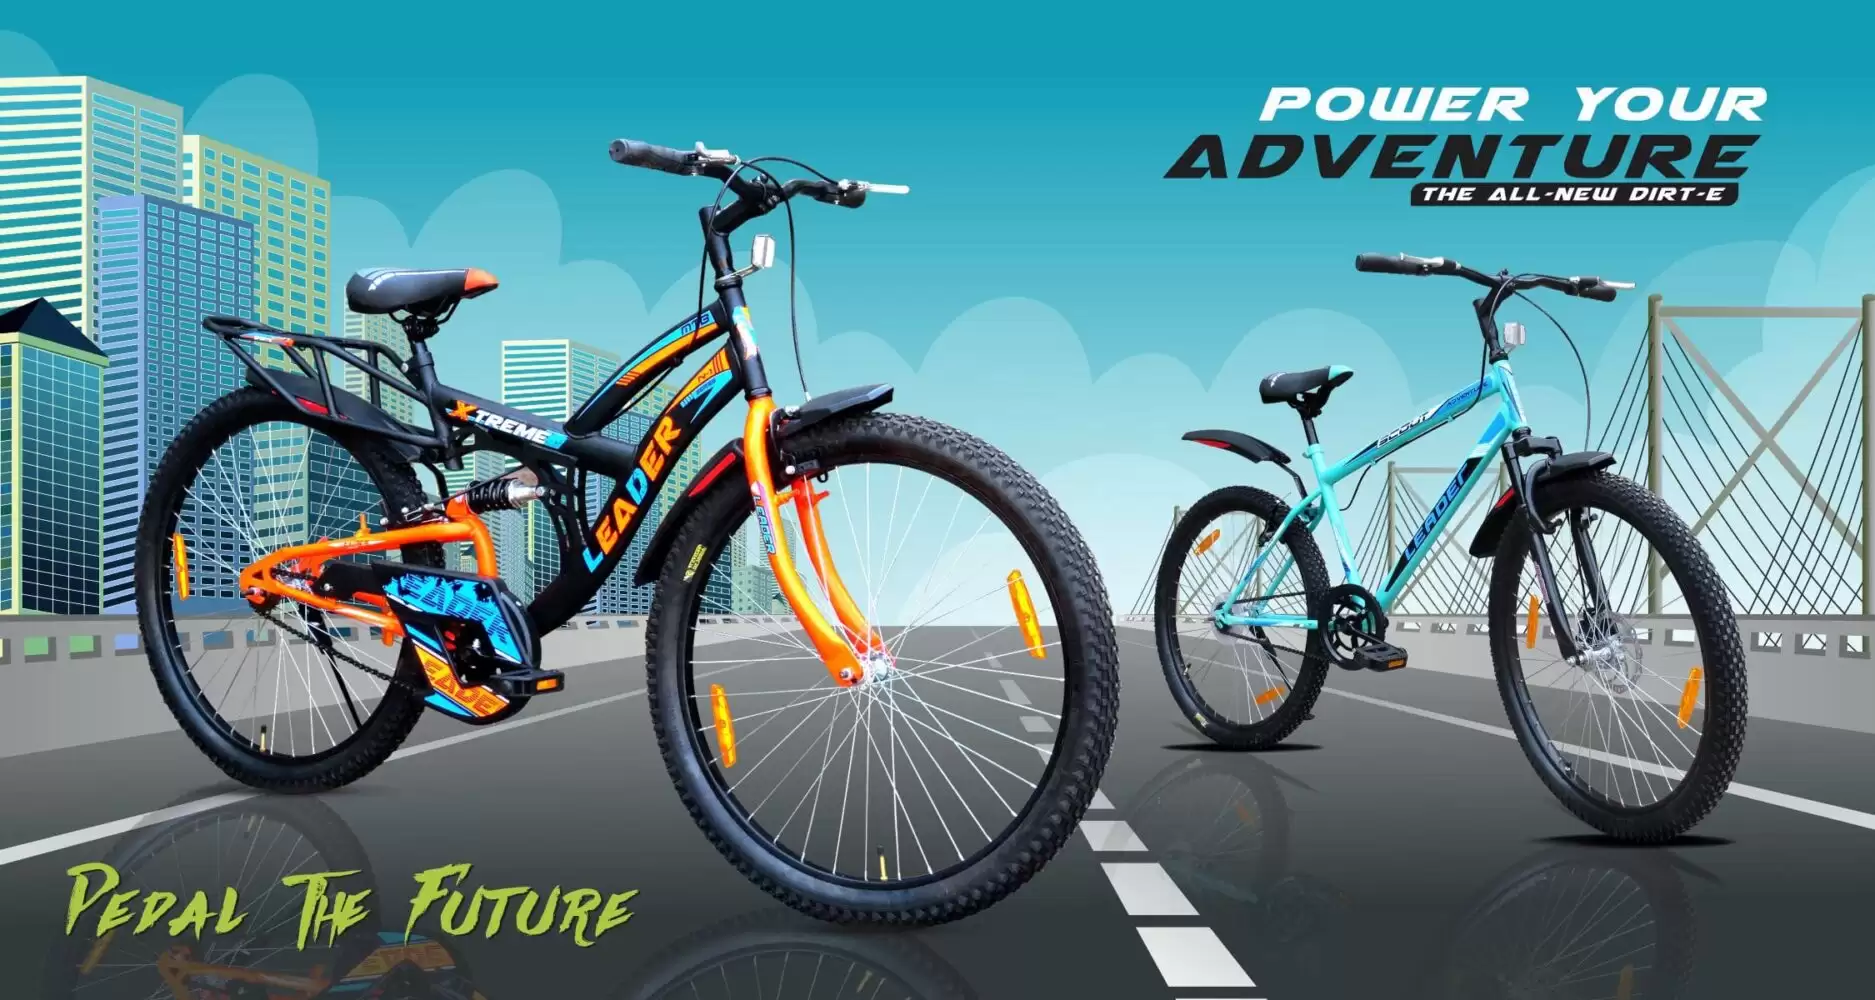 Get Upto 6% Discount With This Discount Coupon At Leaderbicycles.com